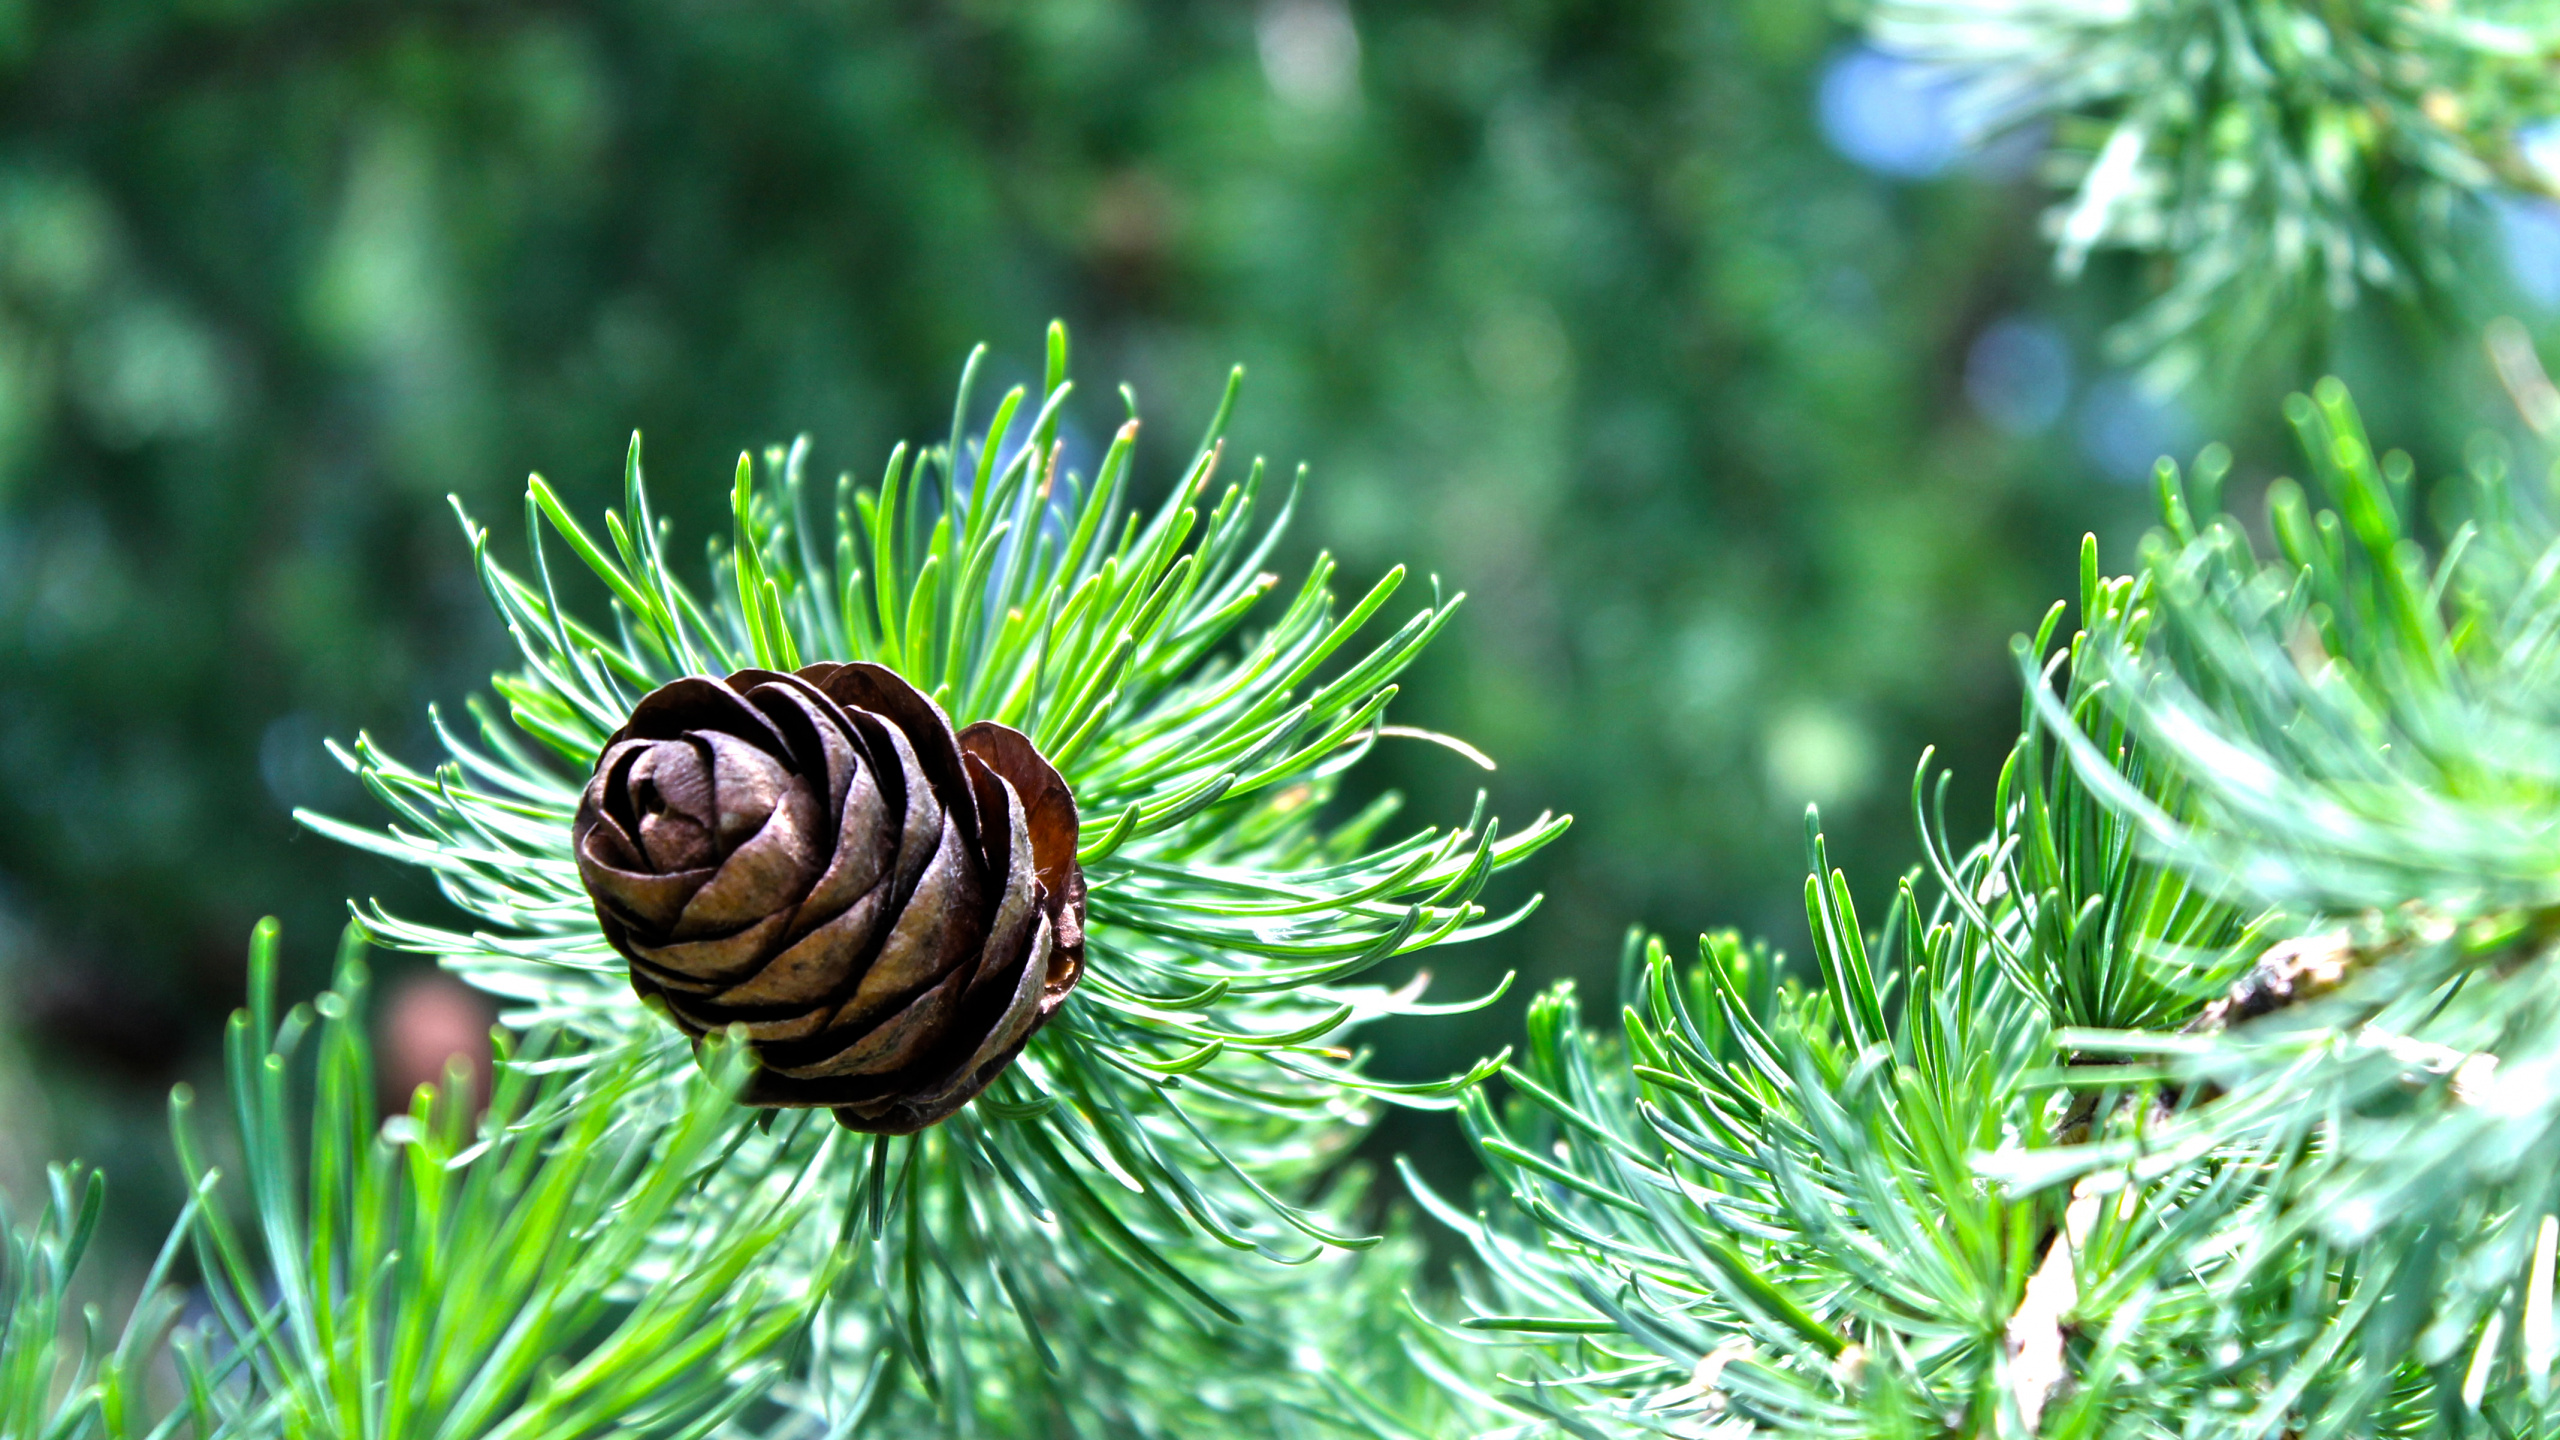 Brown Snail on Green Plant. Wallpaper in 2560x1440 Resolution